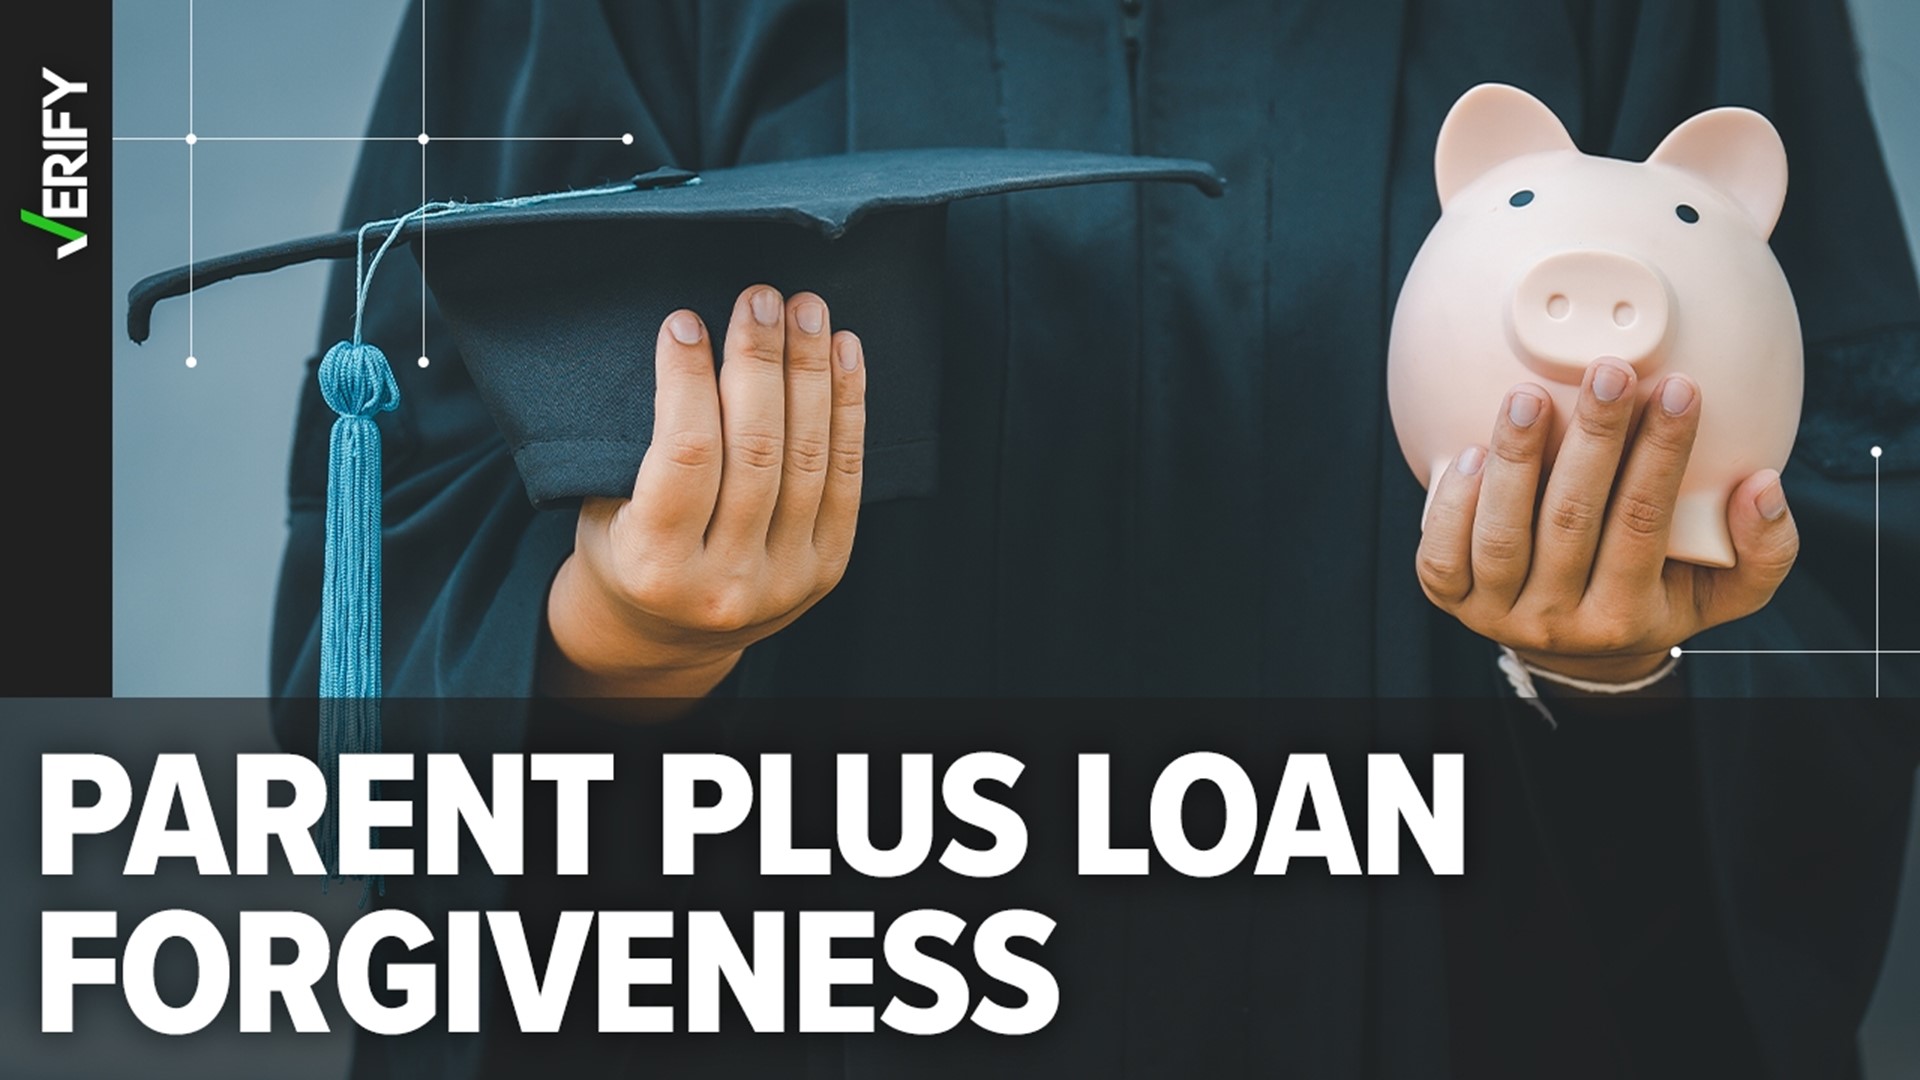 Parent PLUS loans can be forgiven under an income-contingent repayment plan or through public service loan forgiveness, but they must be consolidated first.